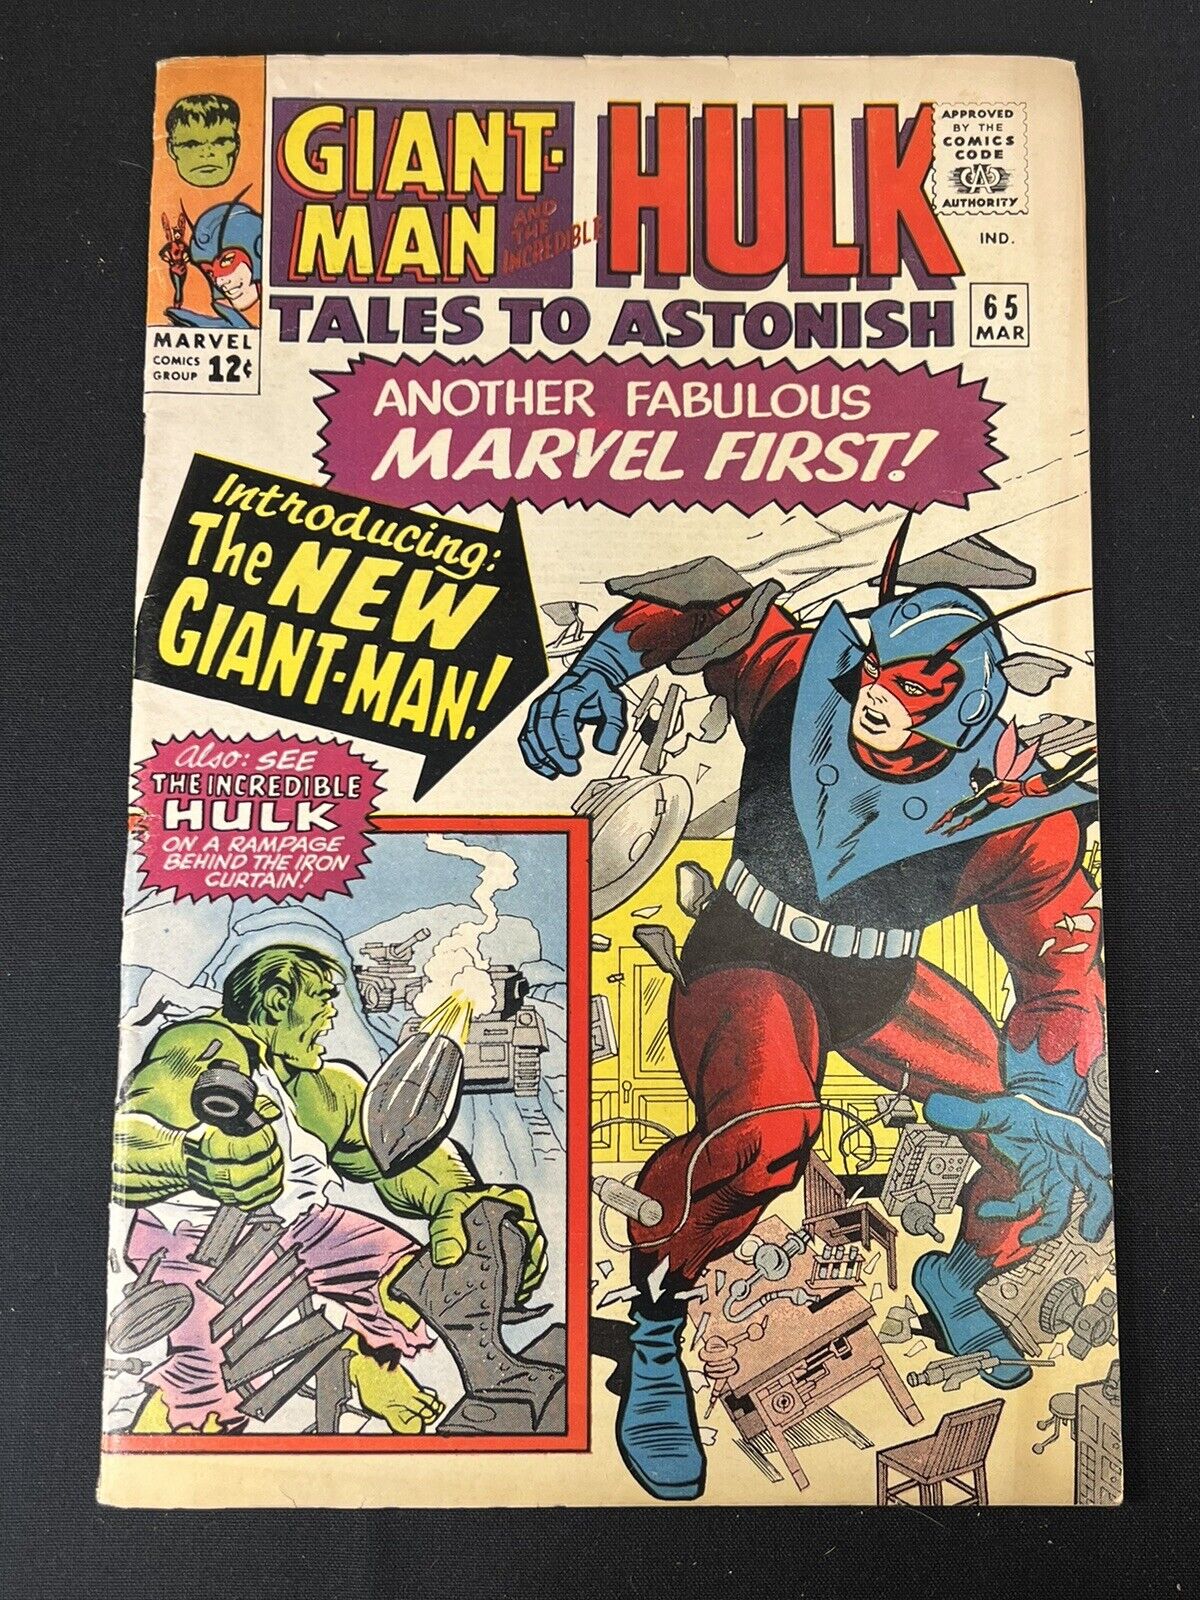 TALES TO ASTONISH #65 Silver Age Marvel 1965 Incredible Hulk Giant Man Ditko Art